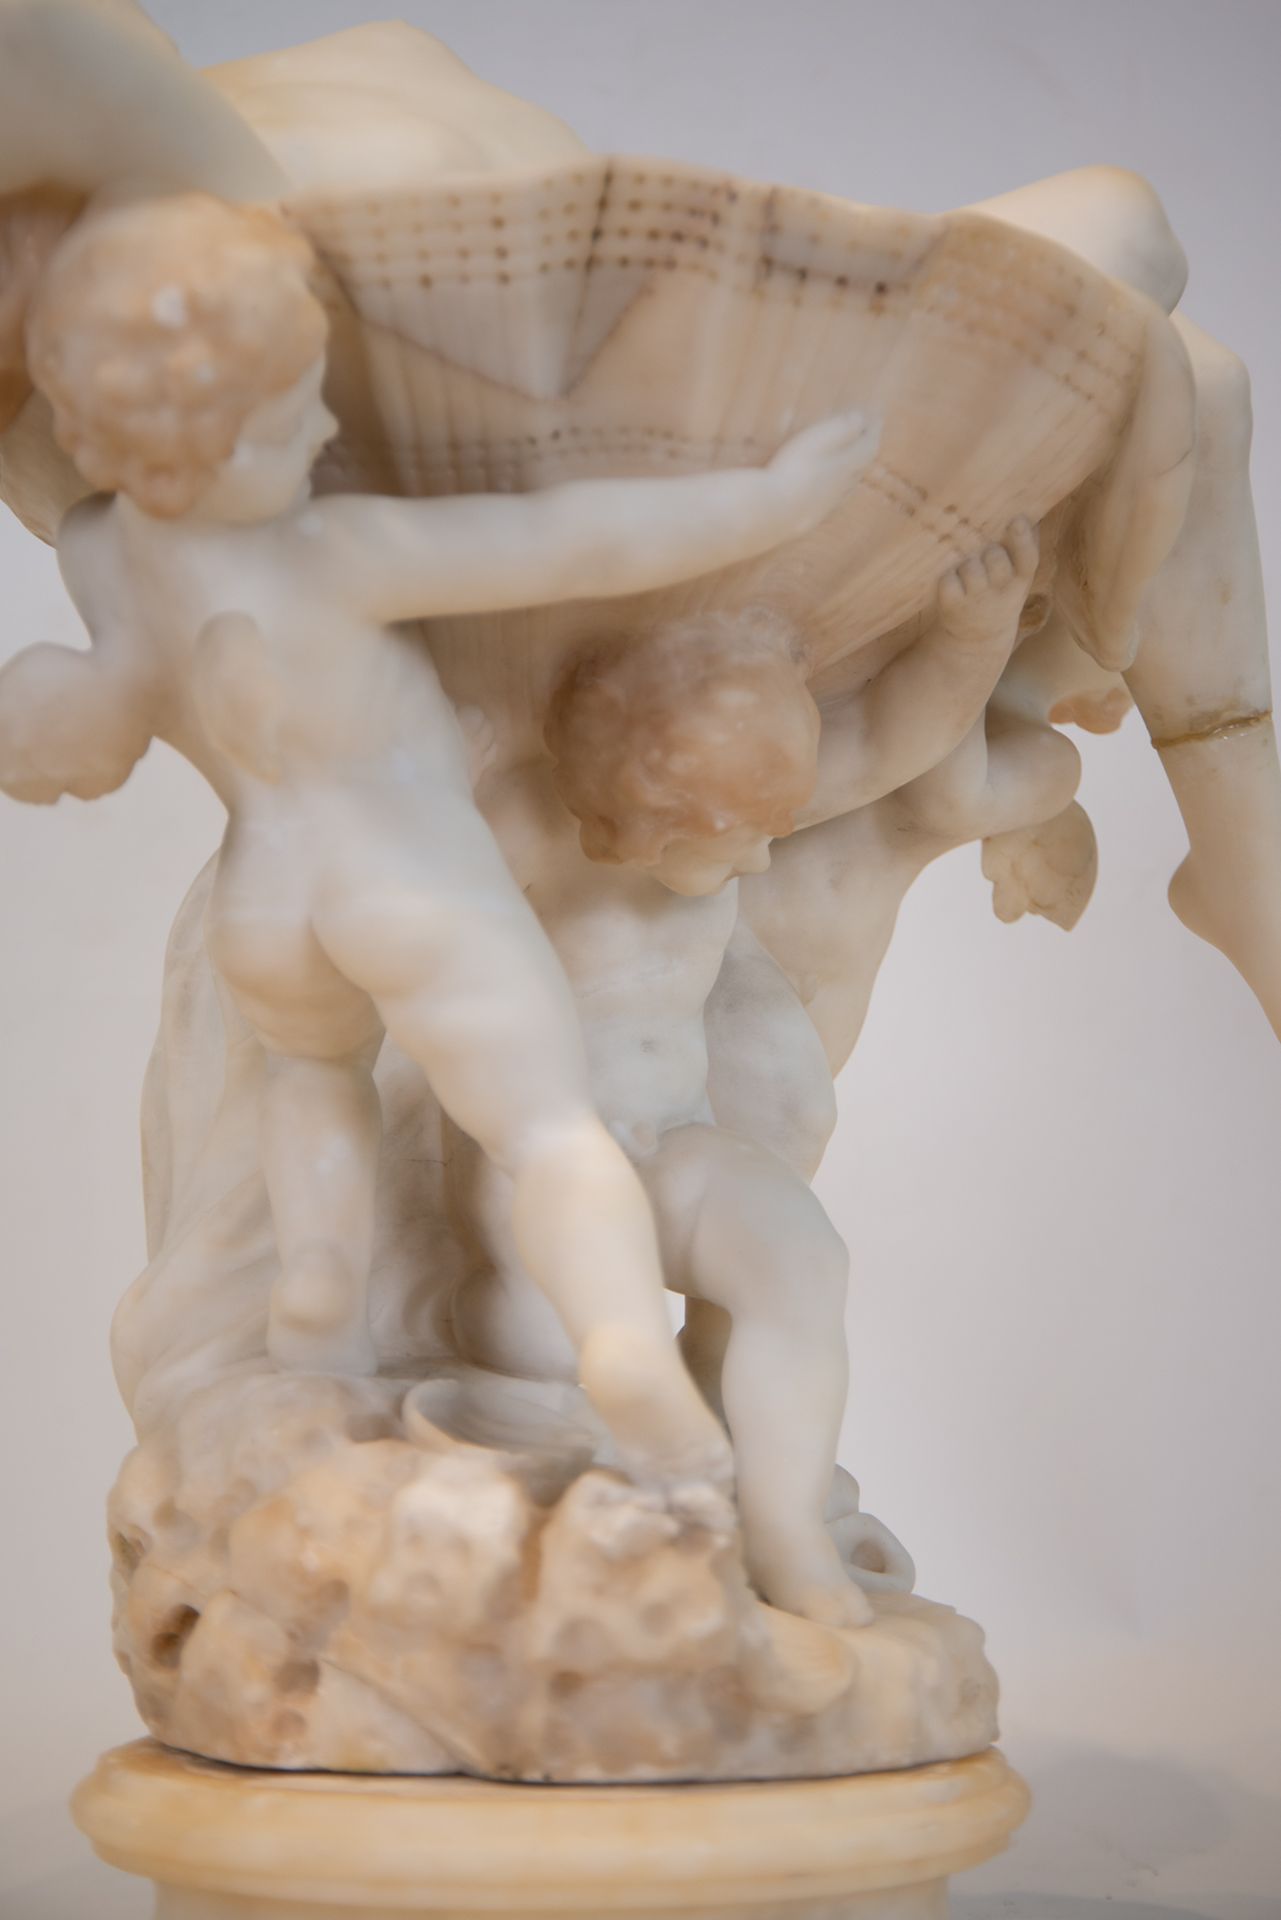 Elegant Alabaster centerpiece representing Cherubs holding an Oyster with a Lady inside, European sc - Image 6 of 8